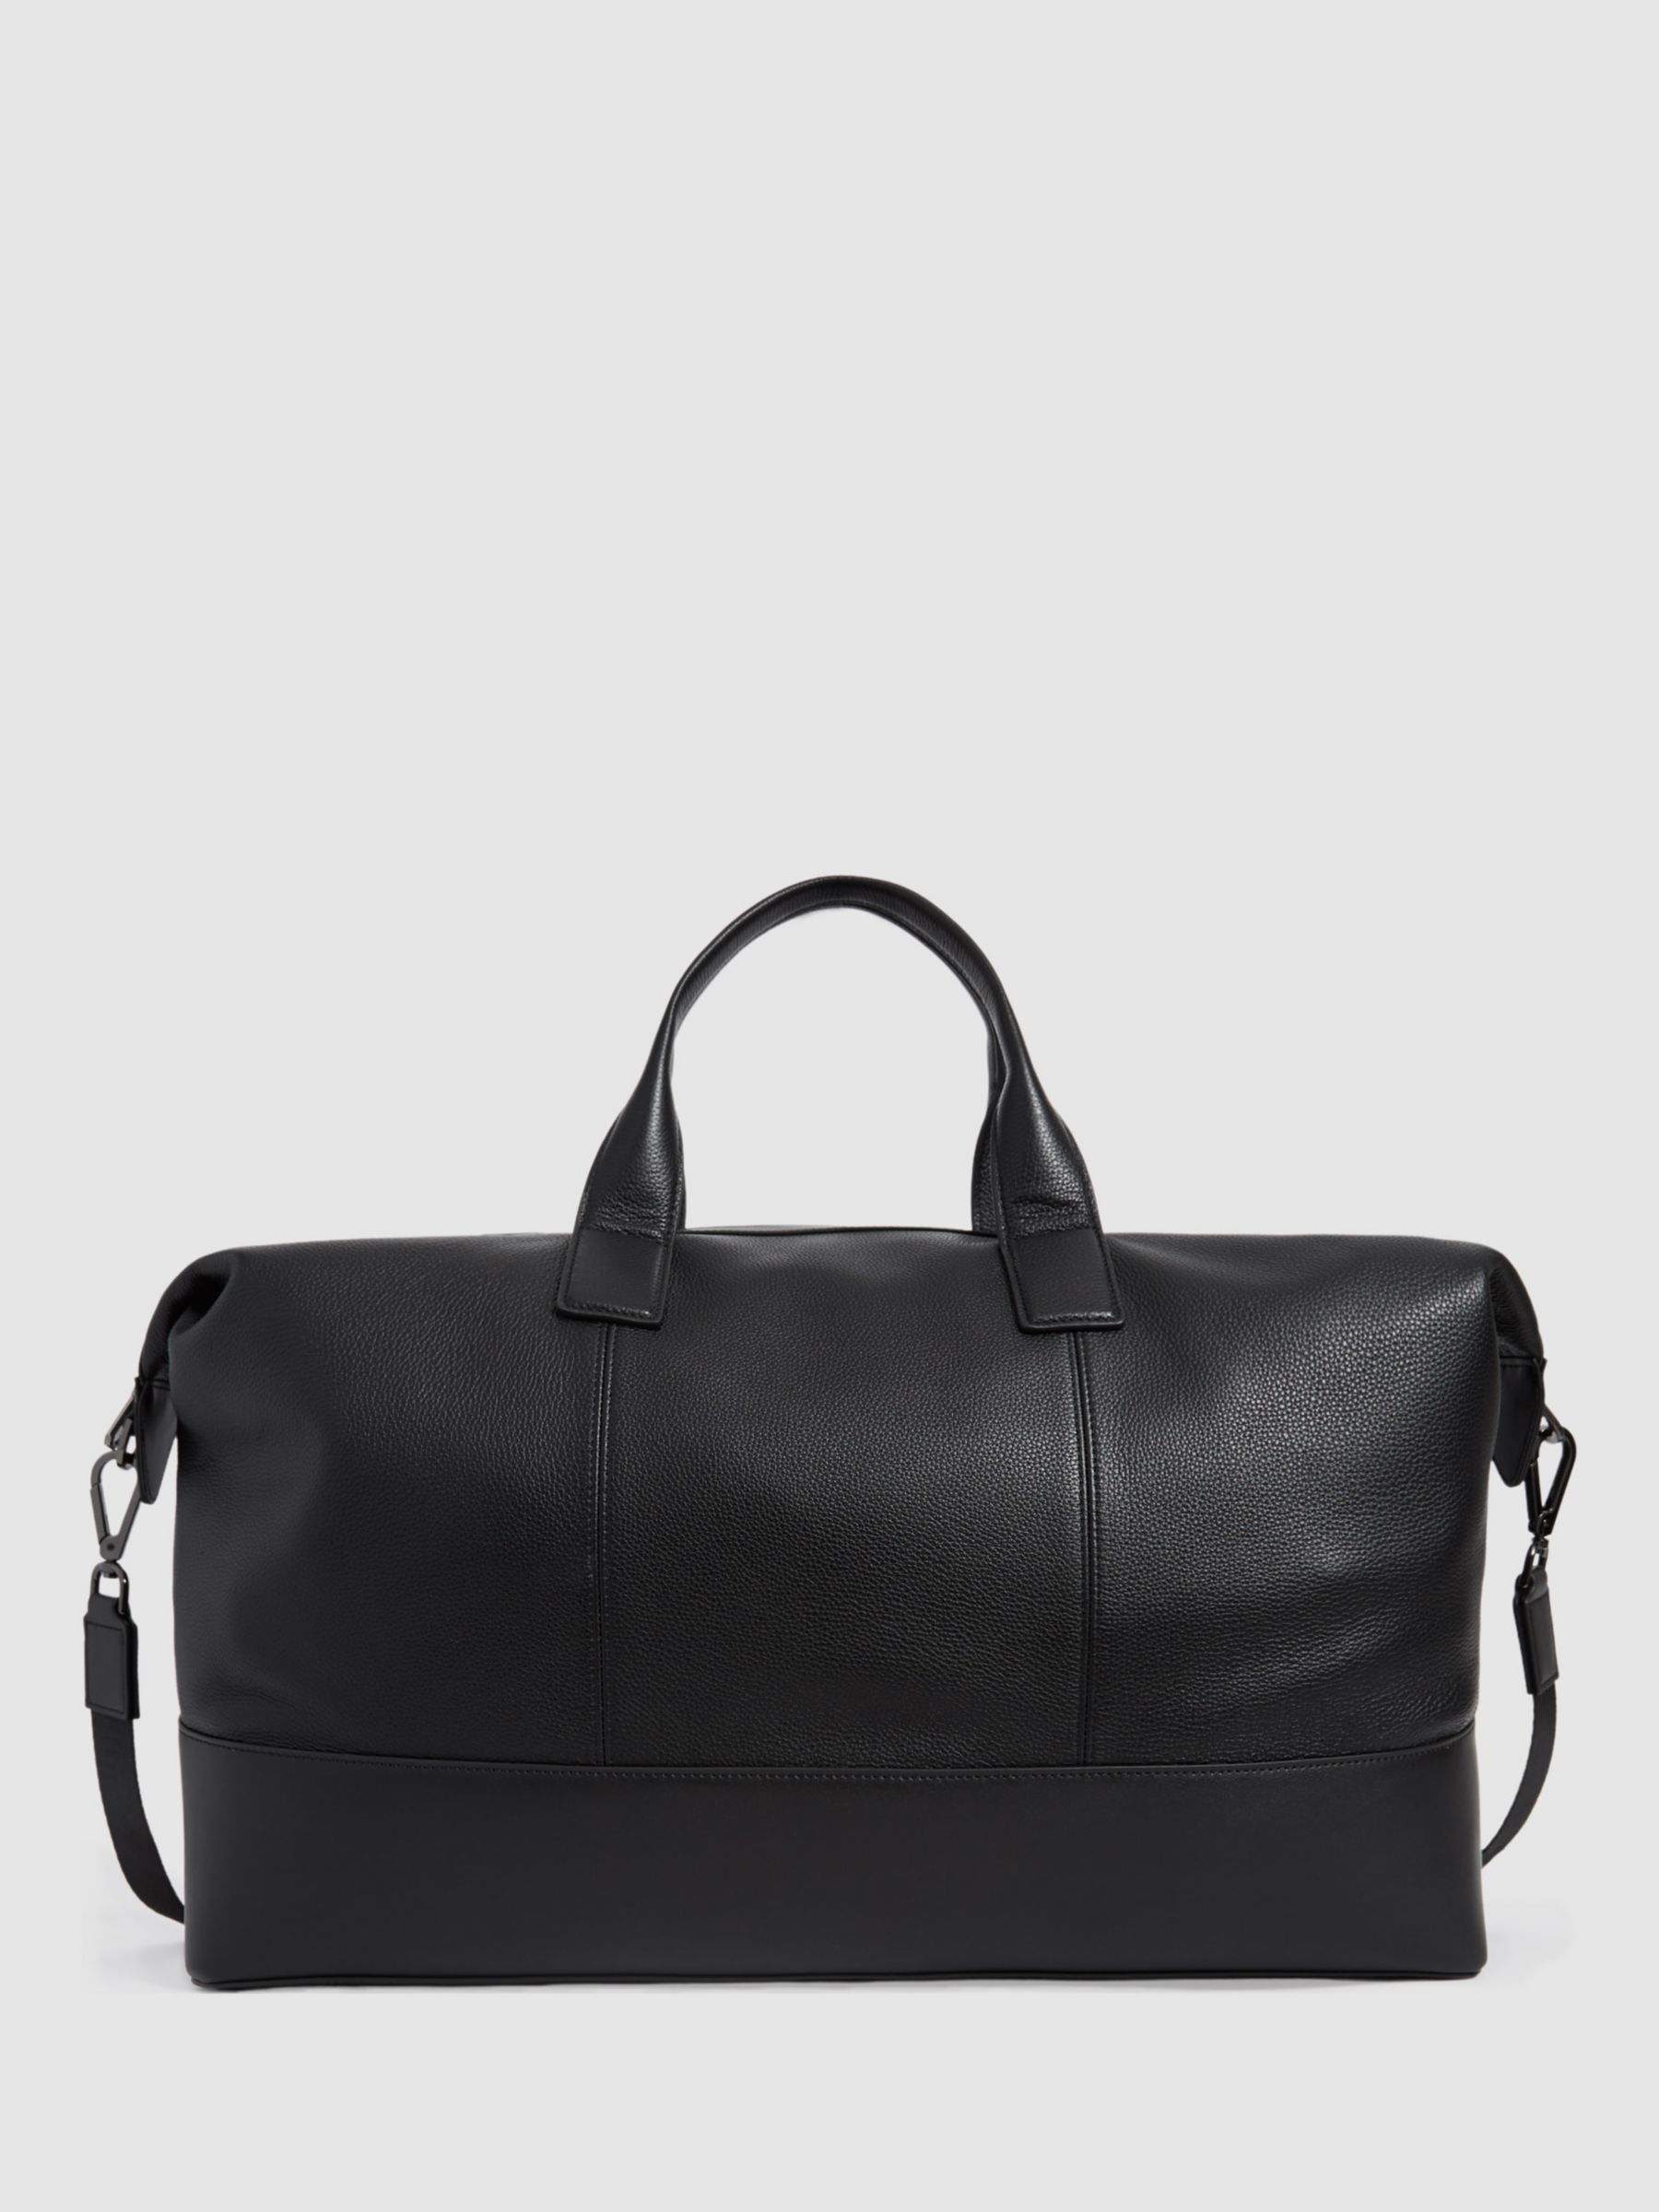 Reiss Carter Leather Holdall, Black at John Lewis & Partners